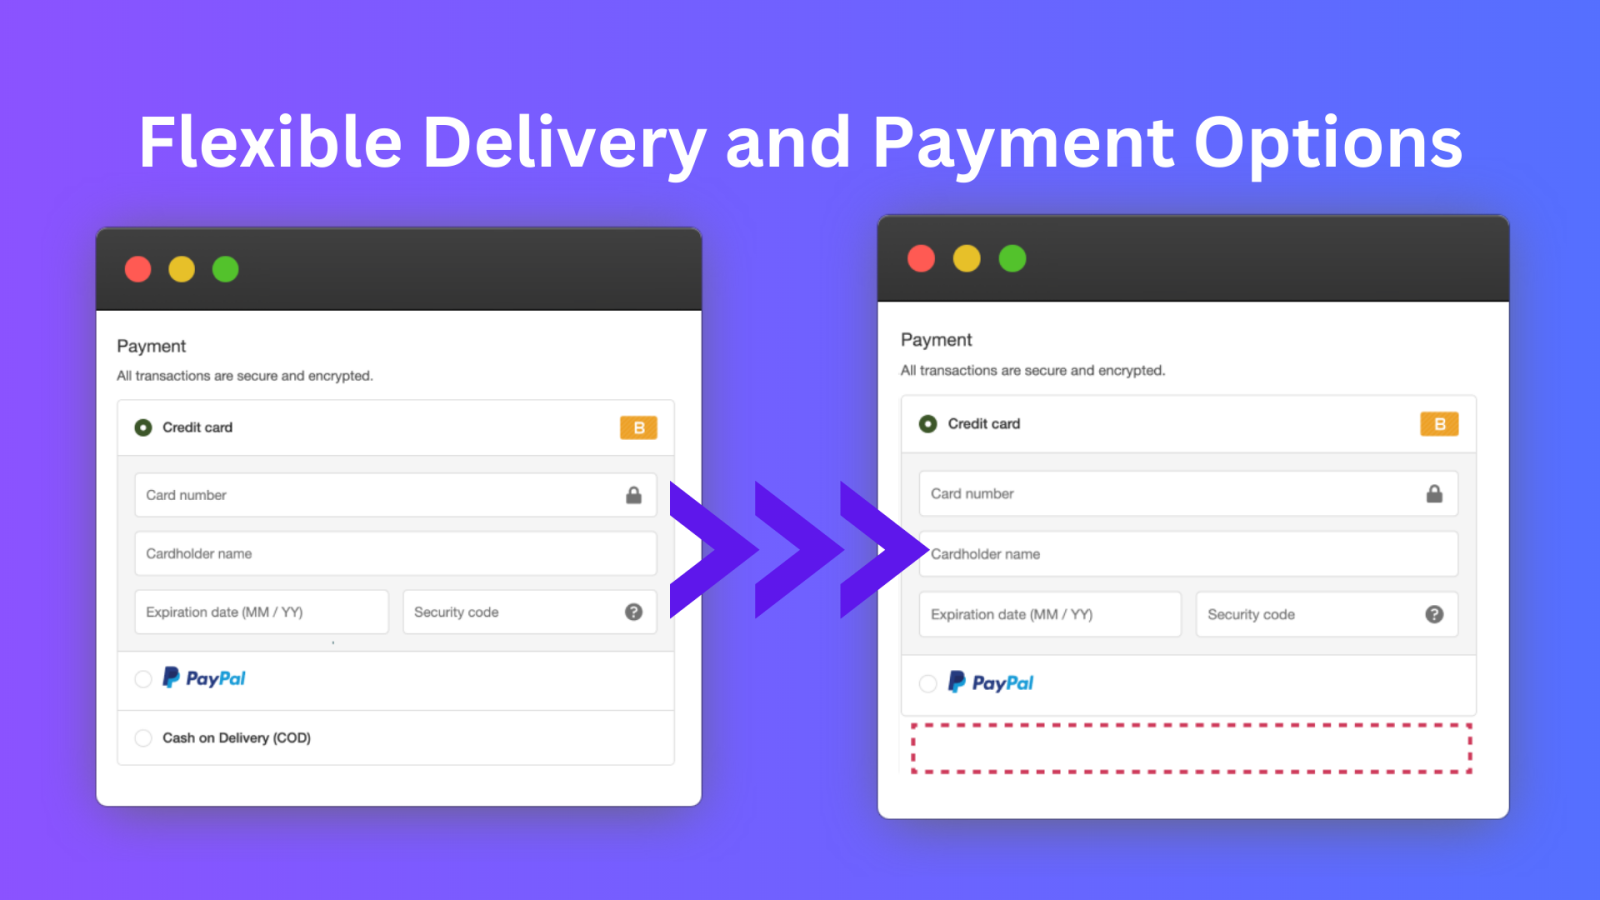 Flexible Delivery and Payment Options